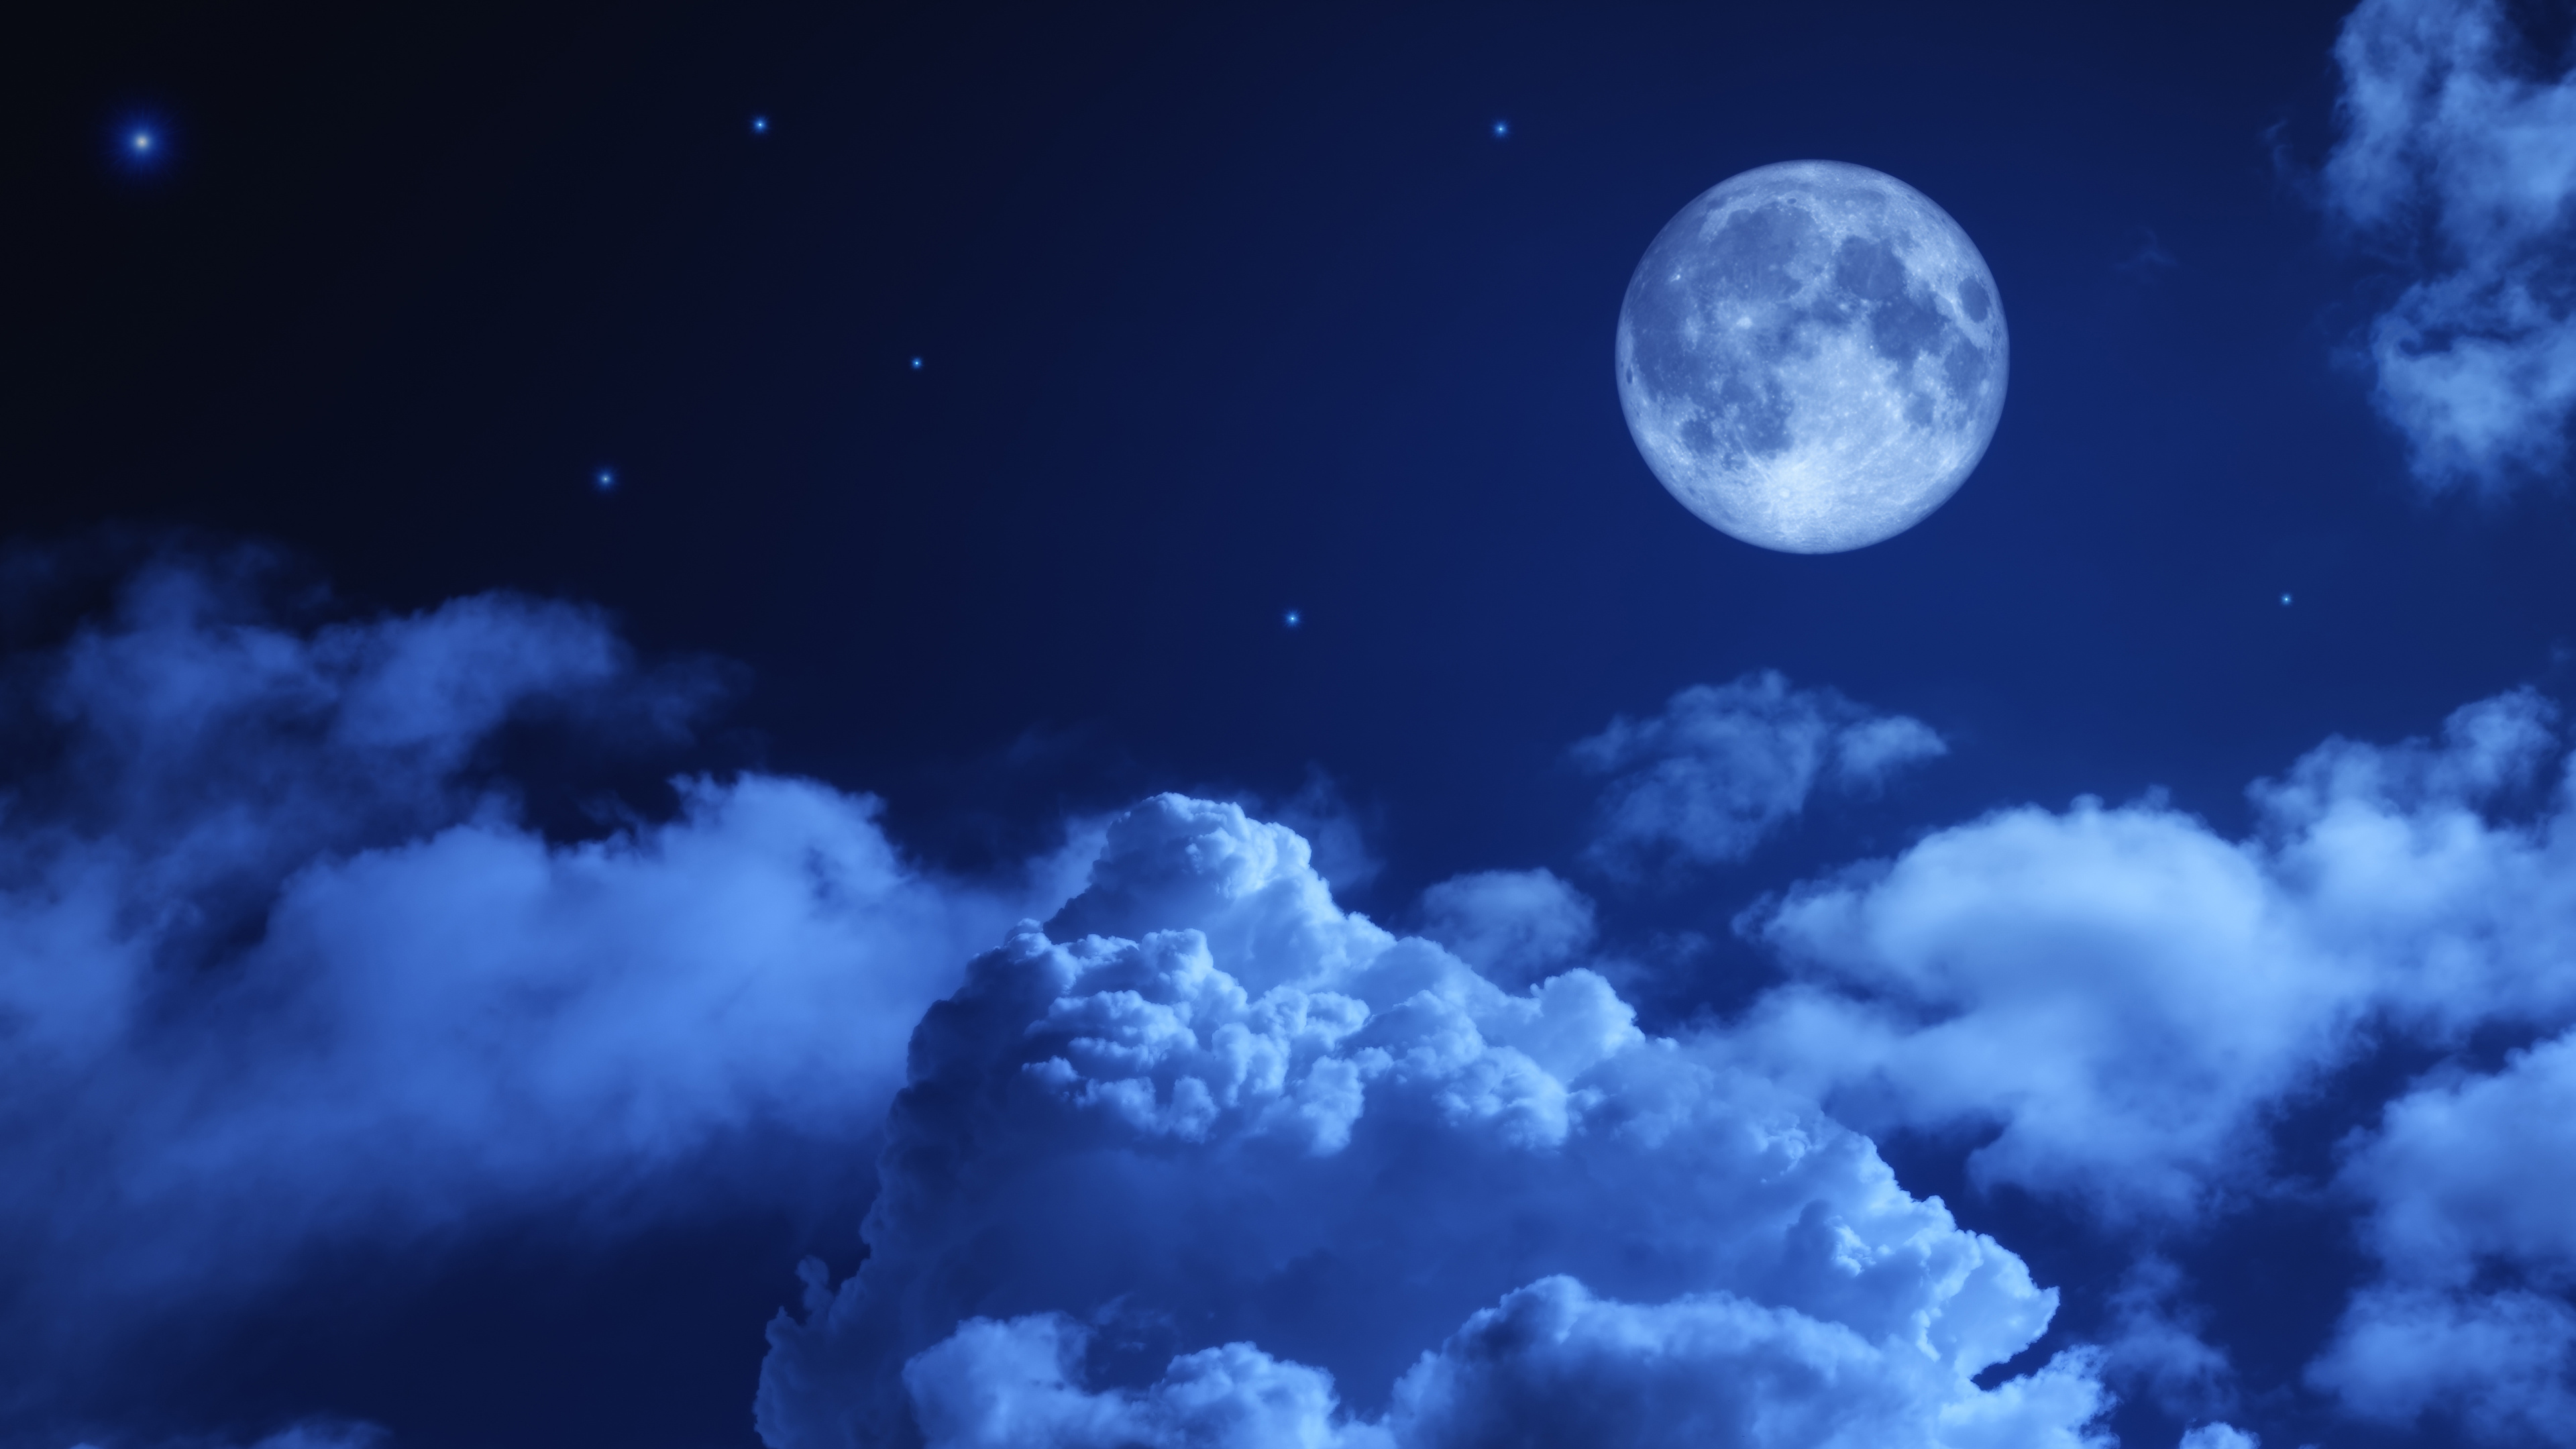 Night Clouds Wallpapers - Top Free Night Clouds Backgrounds ...